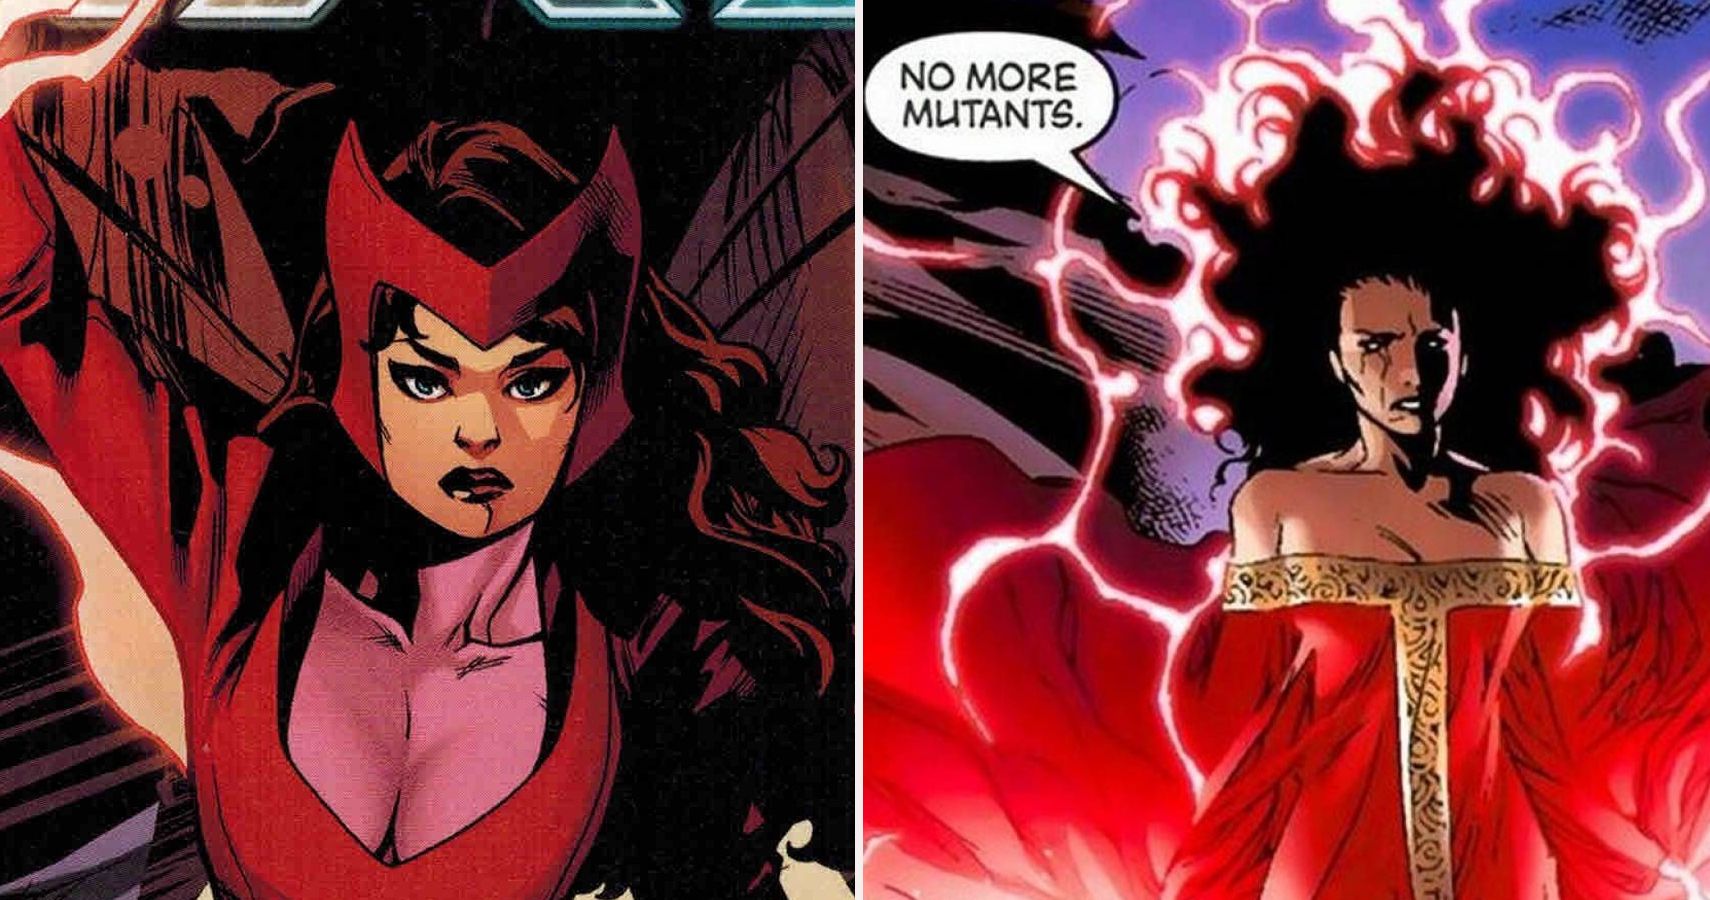 Scarlet Witch's Worst Romance Was With Her Brother, Quicksilver